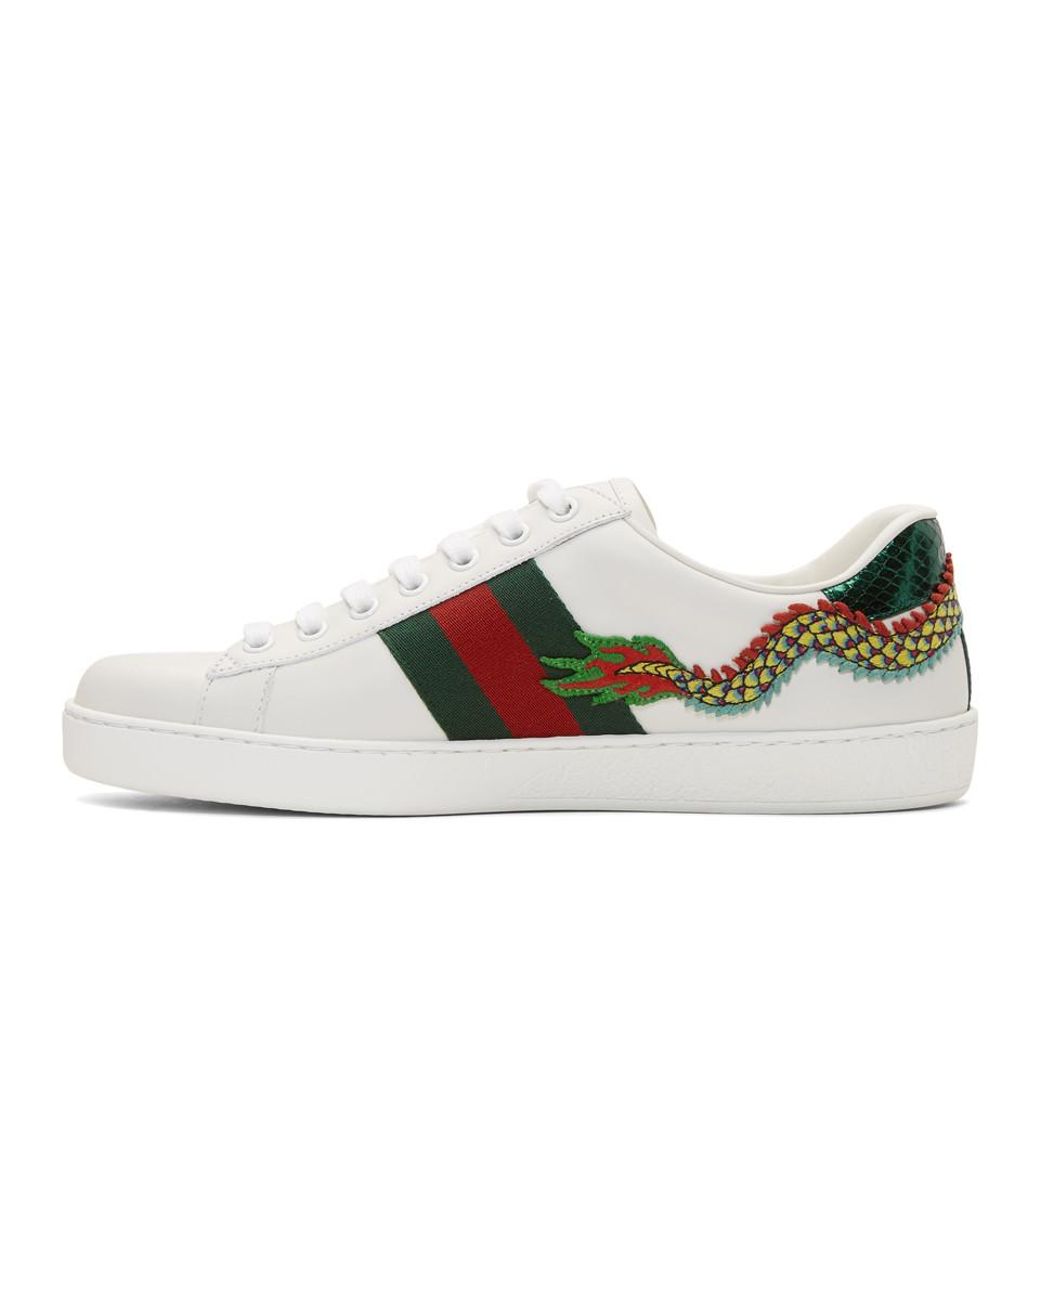 Gucci Leather White Dragon Ace Sneakers for Men | Lyst